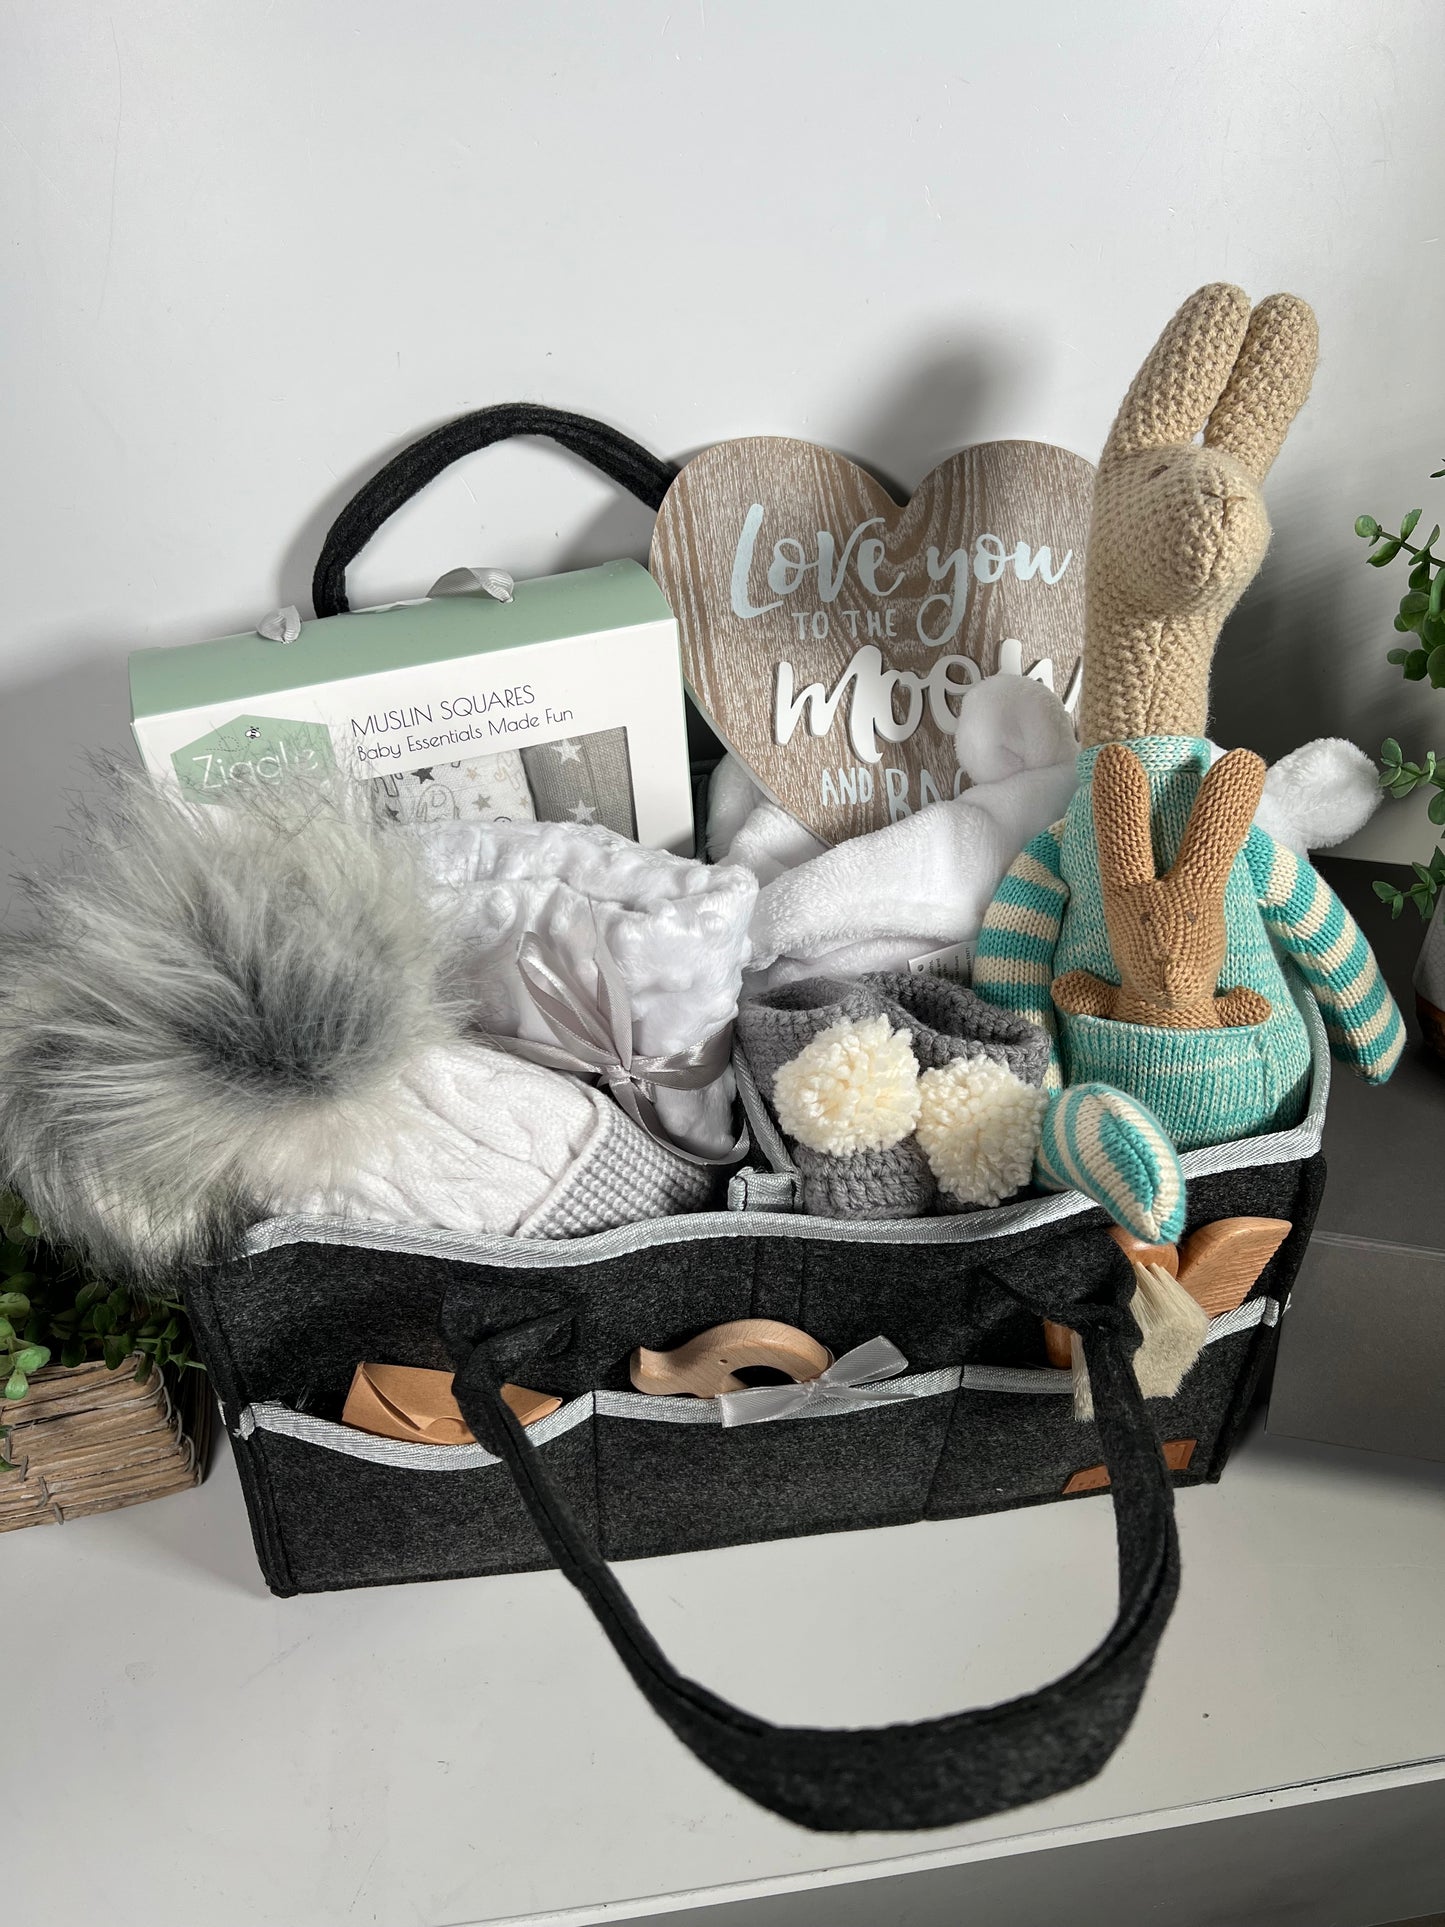 Unisex New Baby Nappy Caddy Hamper Done by Deer Elephant Baby Toy,Baby Dressing Gown, Ziggle Baby Muslins, Corporate Baby Gifts, Baby Shower Presents, New Mummy Gifts.